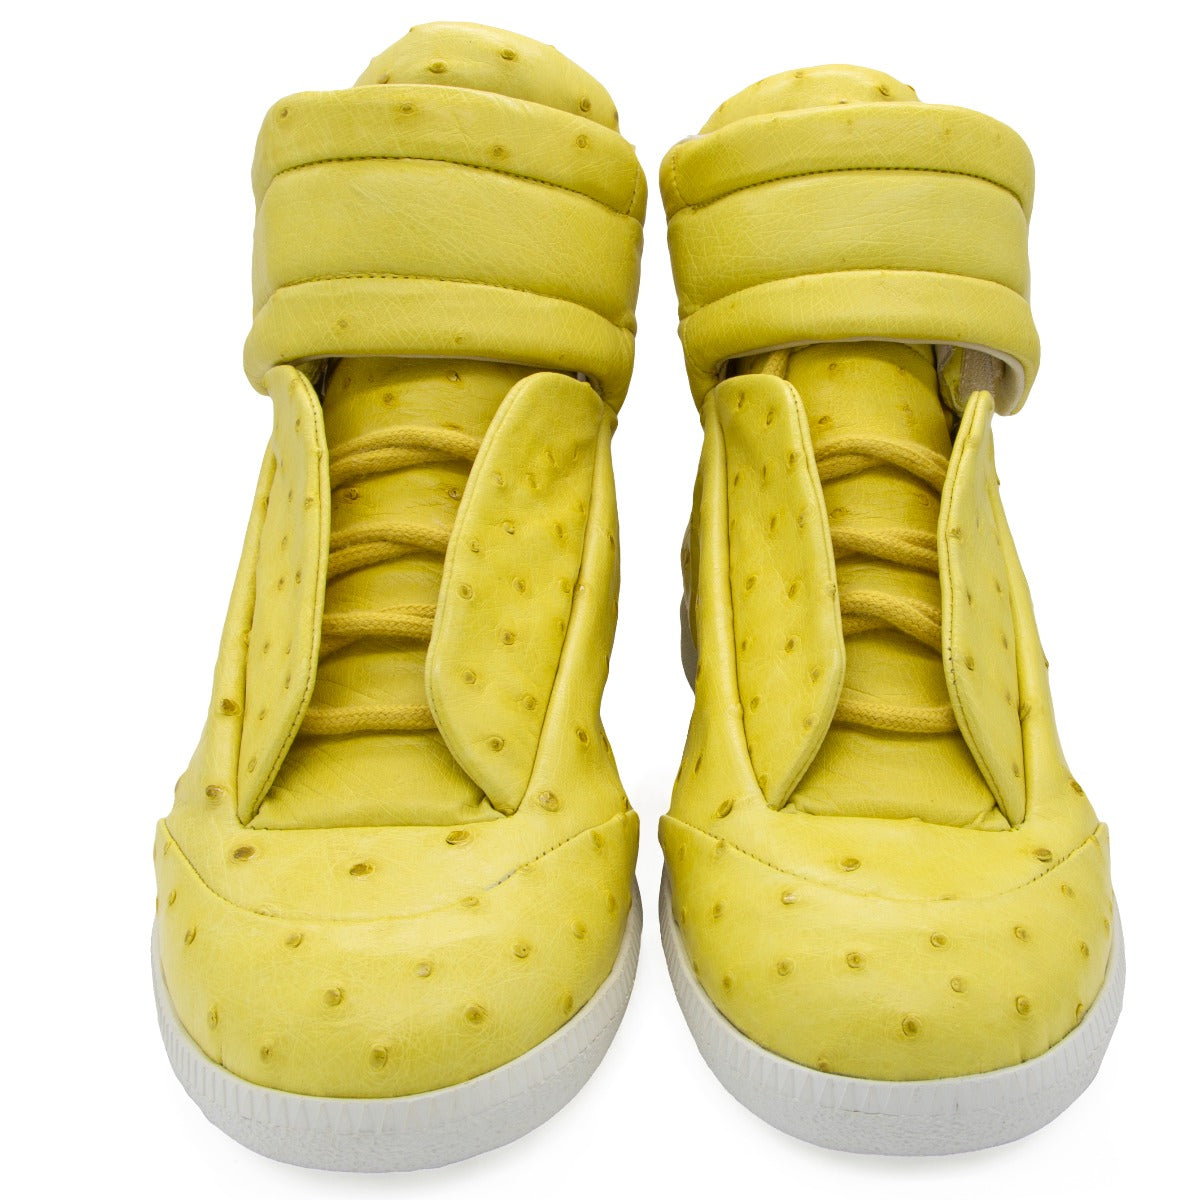 Yellow High-top Future Sneakers - Rewind Vintage Affairs